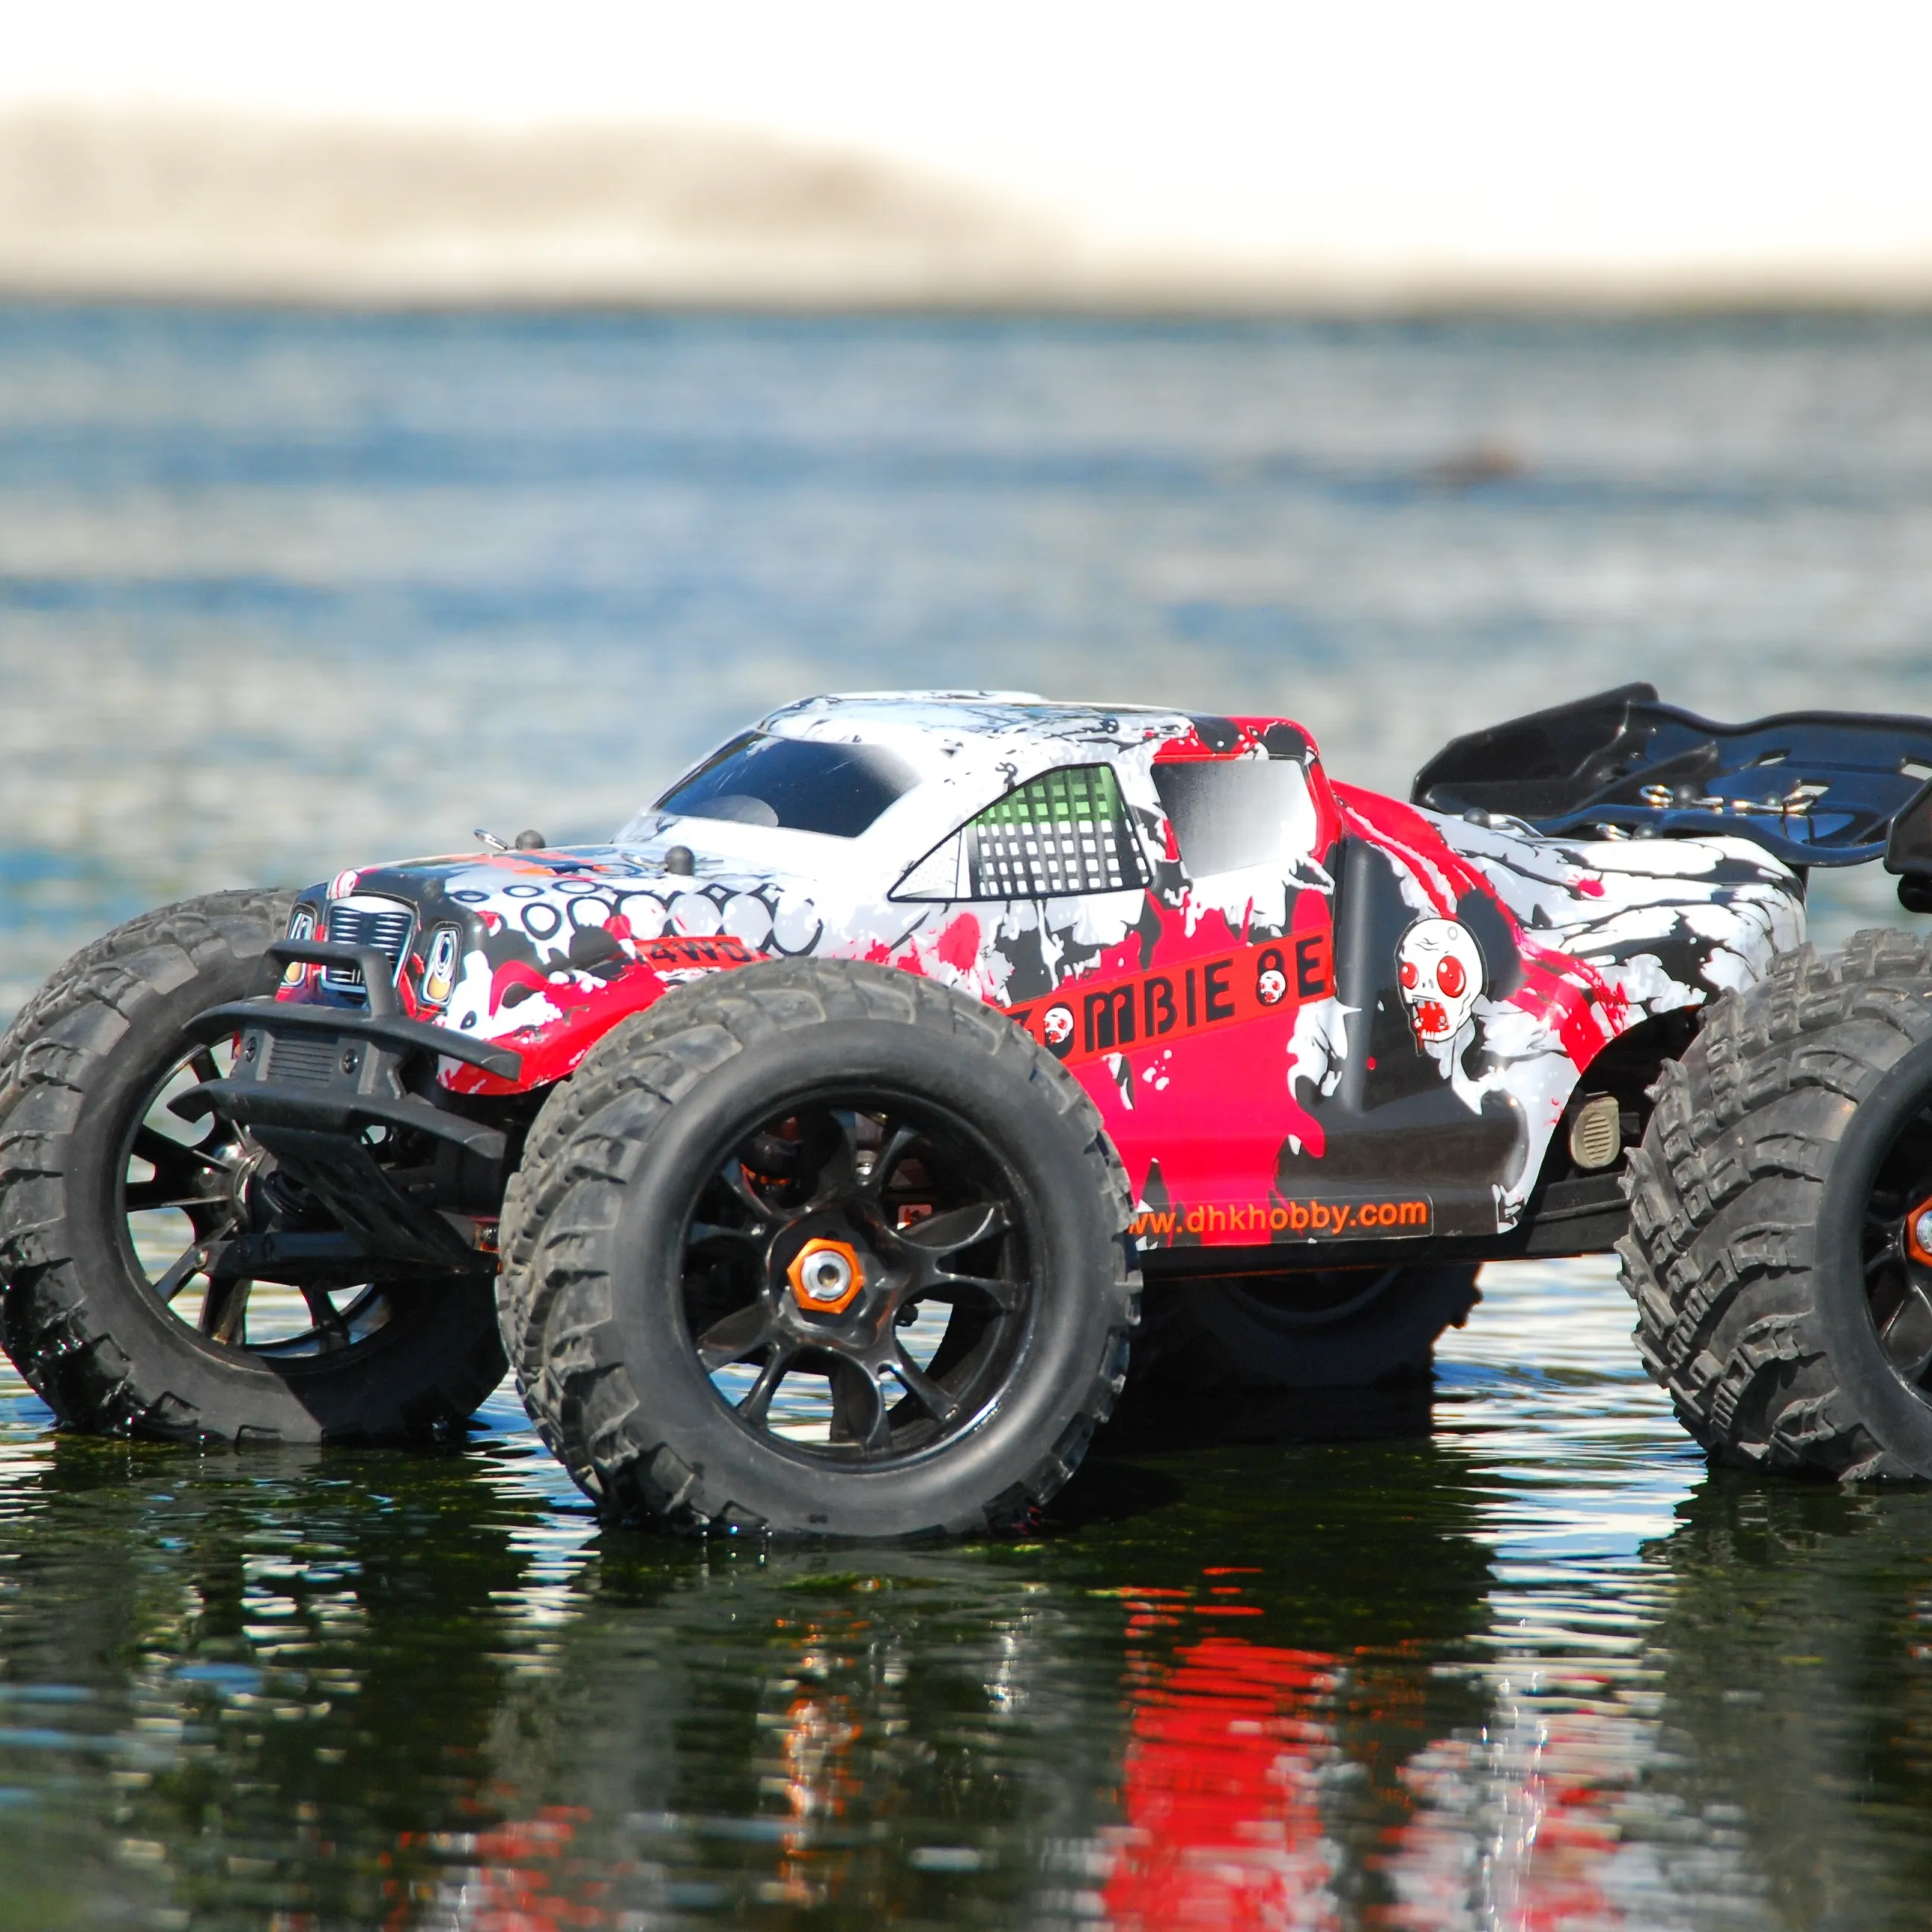 Wholesales DHK Brushless RC Car High Speed 8384 Zombie 8e 1:8 4WD BRUSHLESS OFF-ROAD TRUGGY - PVC Body